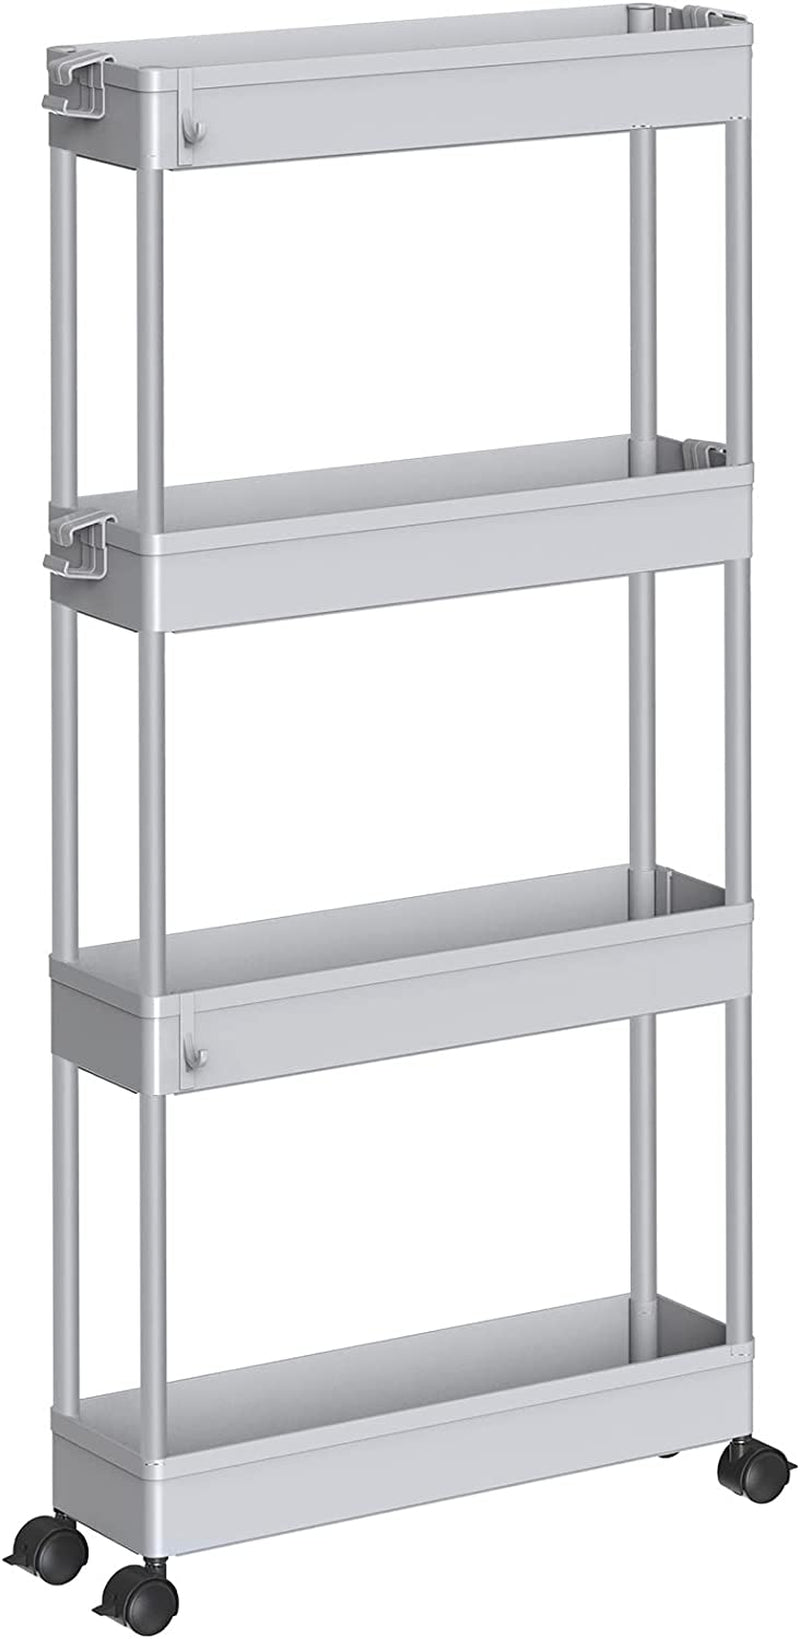 SPACEKEEPER Slim Rolling Storage Cart 4 Tier Bathroom Organizer Mobile Shelving Unit Storage Rolling Utility Cart Tower Rack for Kitchen Bathroom Laundry Narrow Places, White Home & Garden > Household Supplies > Storage & Organization SPACEKEEPER Grey  